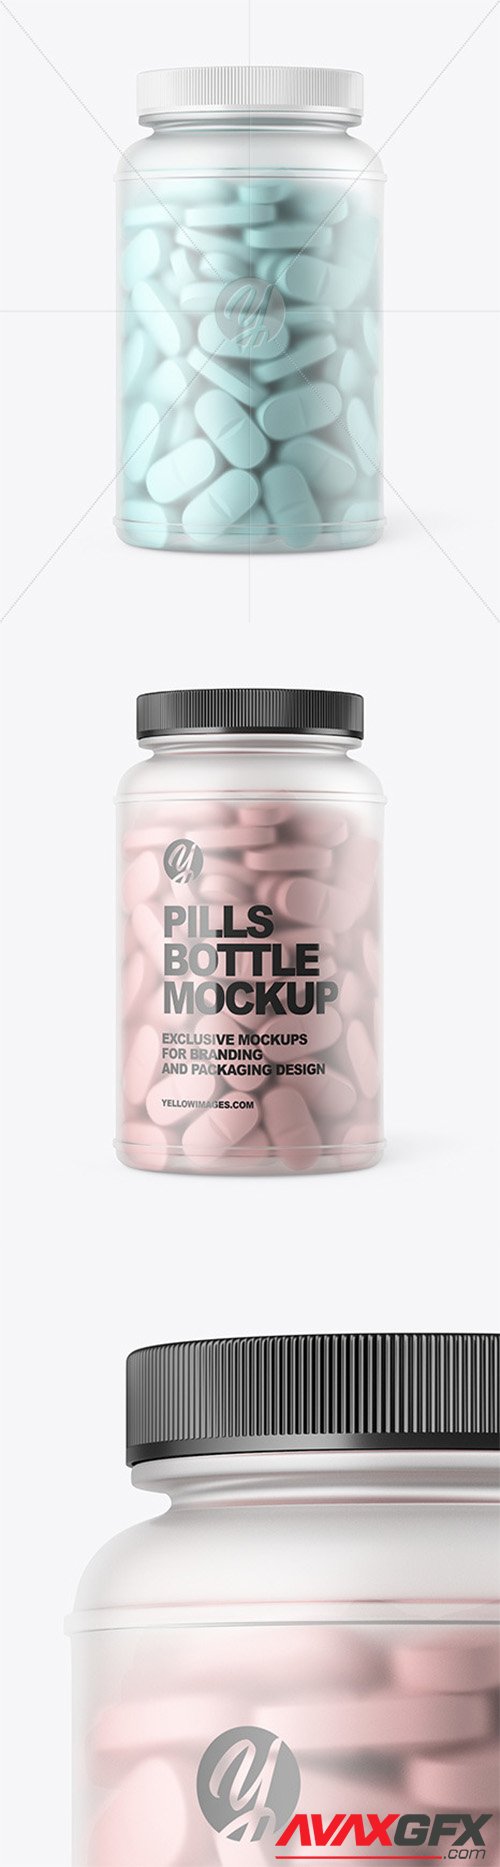 Download Frosted Pills Bottle Mockup 56645 Avaxgfx All Downloads That You Need In One Place Graphic From Nitroflare Rapidgator PSD Mockup Templates